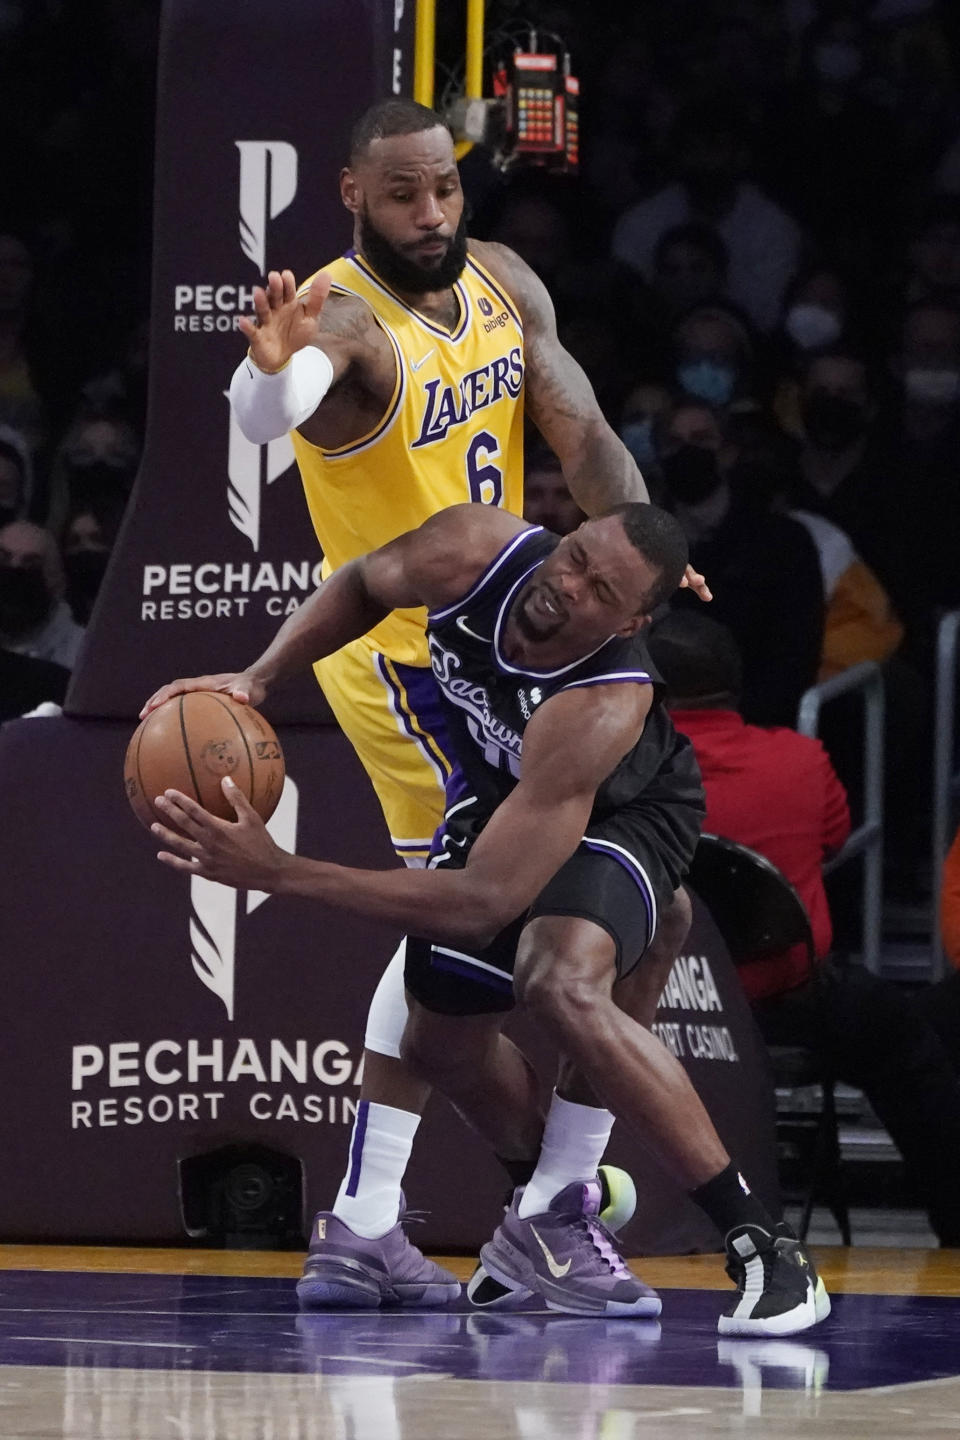 Sacramento Kings forward Harrison Barnes, right, is fouled by Los Angeles Lakers forward LeBron James (6) during the first half of an NBA basketball game Tuesday, Jan. 4, 2022, in Los Angeles. (AP Photo/Marcio Jose Sanchez)